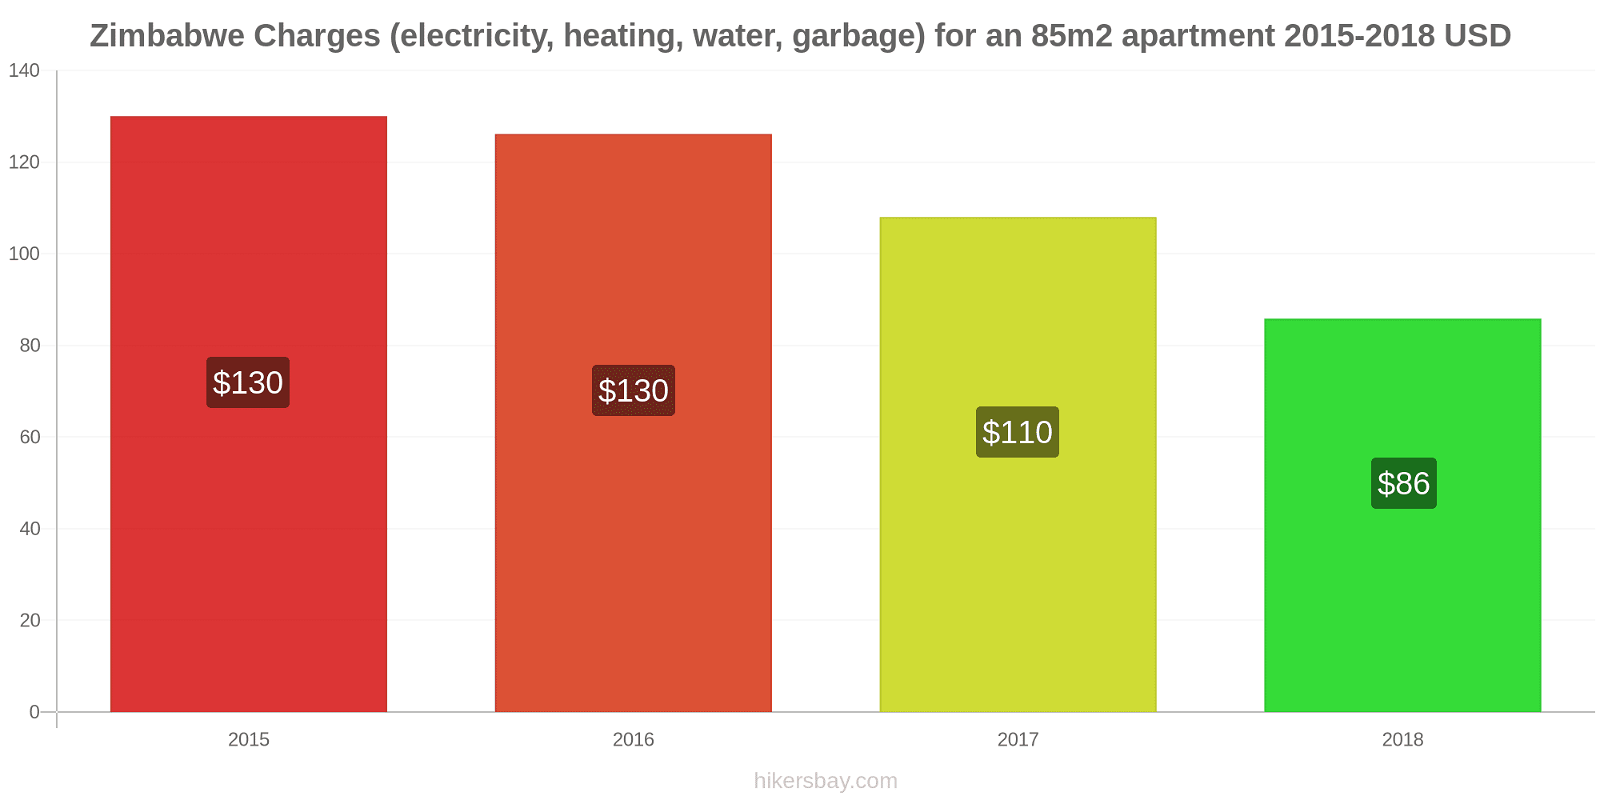 Zimbabwe price changes Utilities (electricity, heating, water, garbage) for an 85m2 apartment hikersbay.com